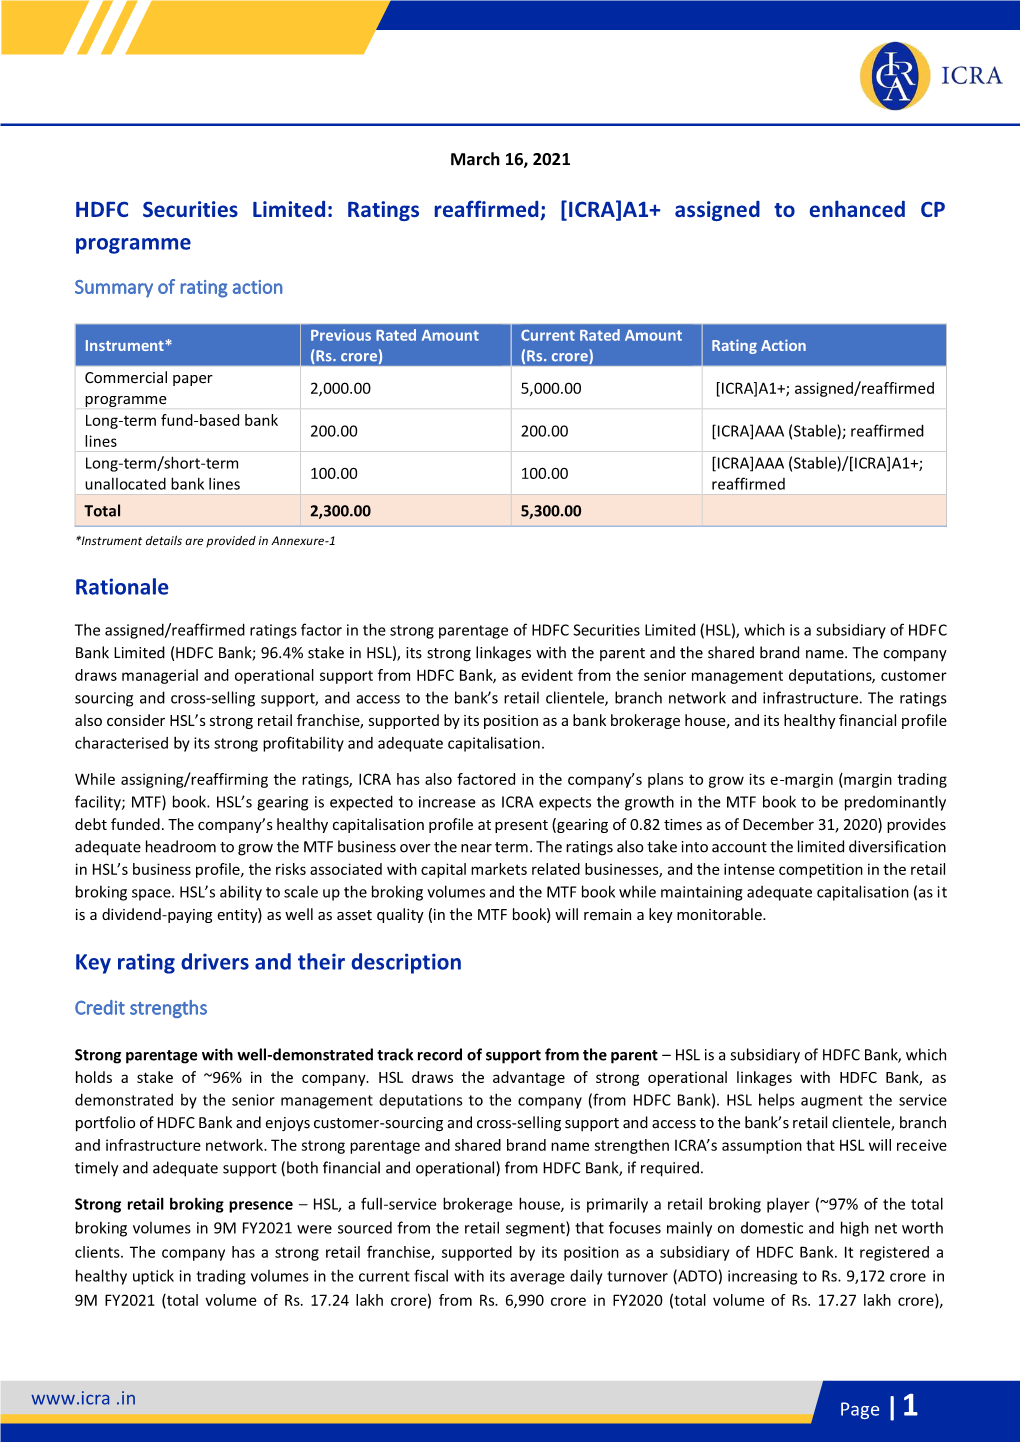 HDFC Securities Limited: Ratings Reaffirmed; [ICRA]A1+ Assigned to Enhanced CP Programme